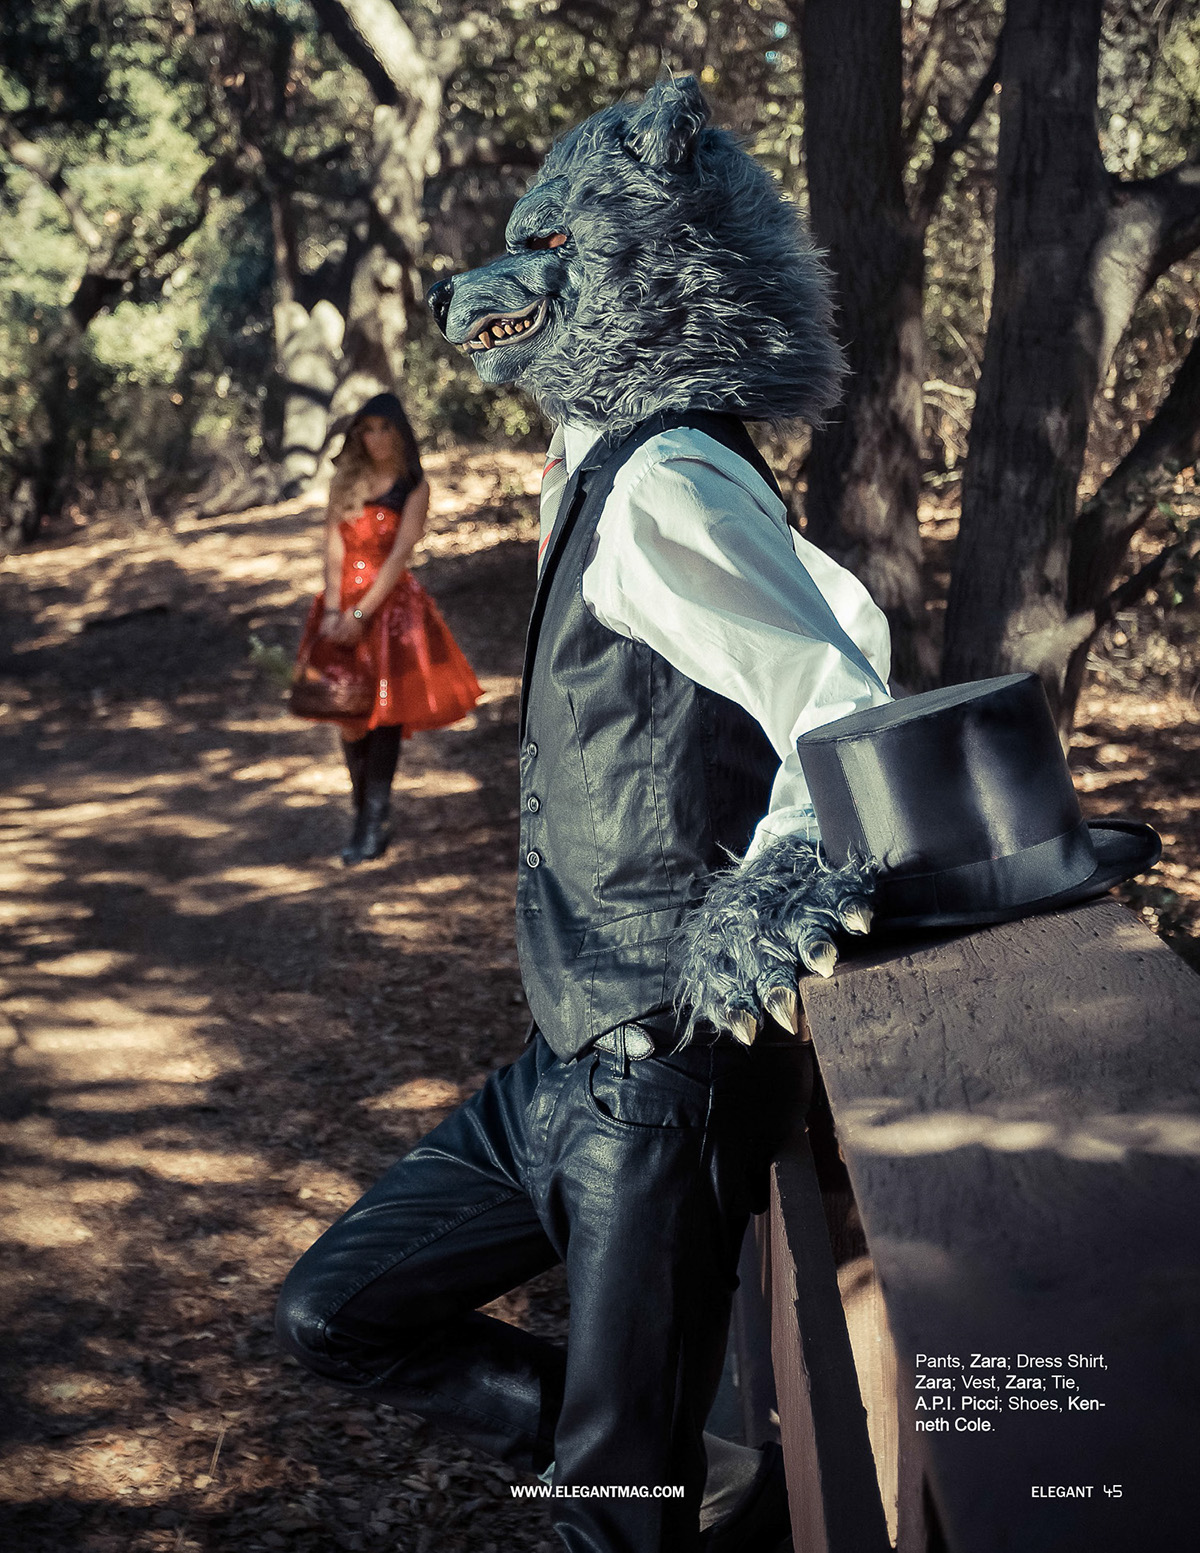 model Style wolf Red riding hood forest editorial magazine cover story